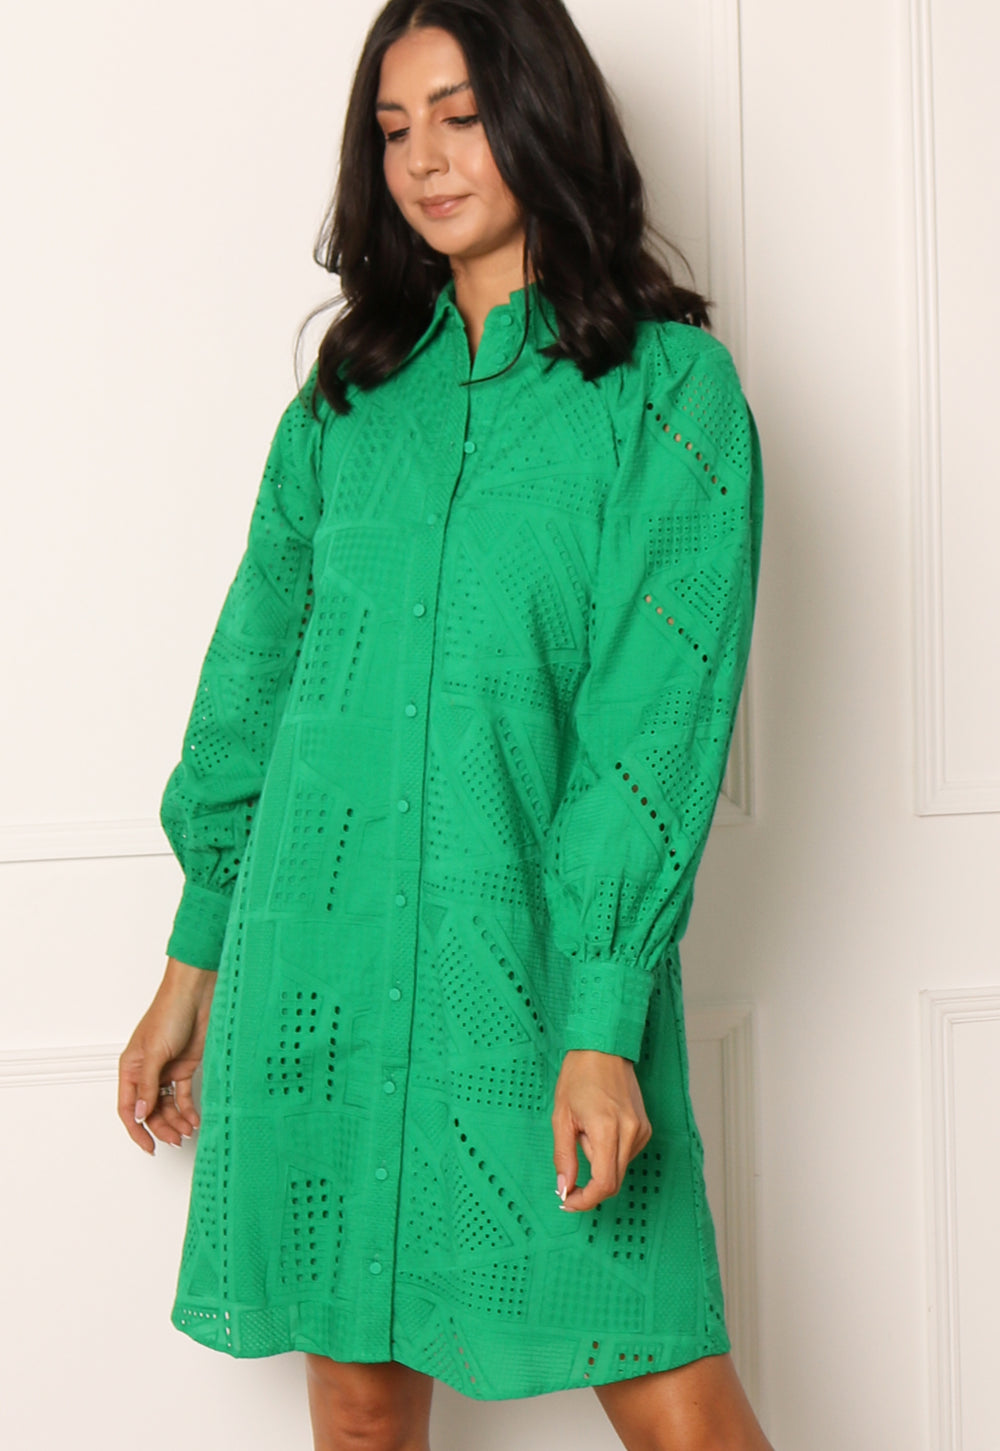 Bright Anglaise in Dress Nation Broderie Sado Long Green Anglaise Shirt Sleeve Bright Dress Sleeve Broderie Clothing YAS Green Sado in YAS Shirt One Long |